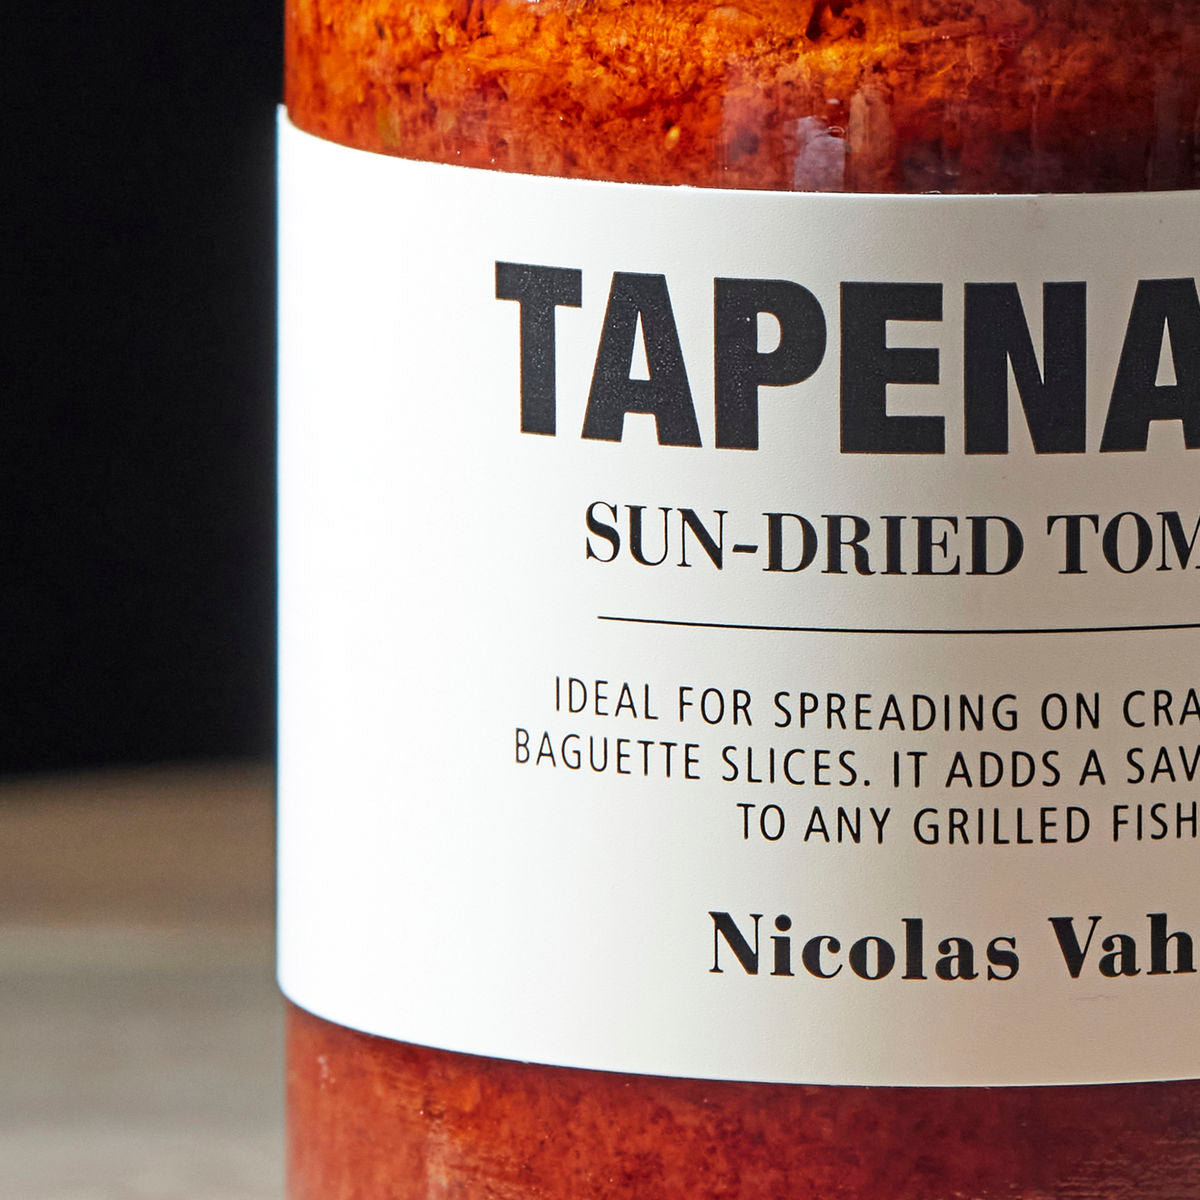 Tapenade, Sundried Tomatoes